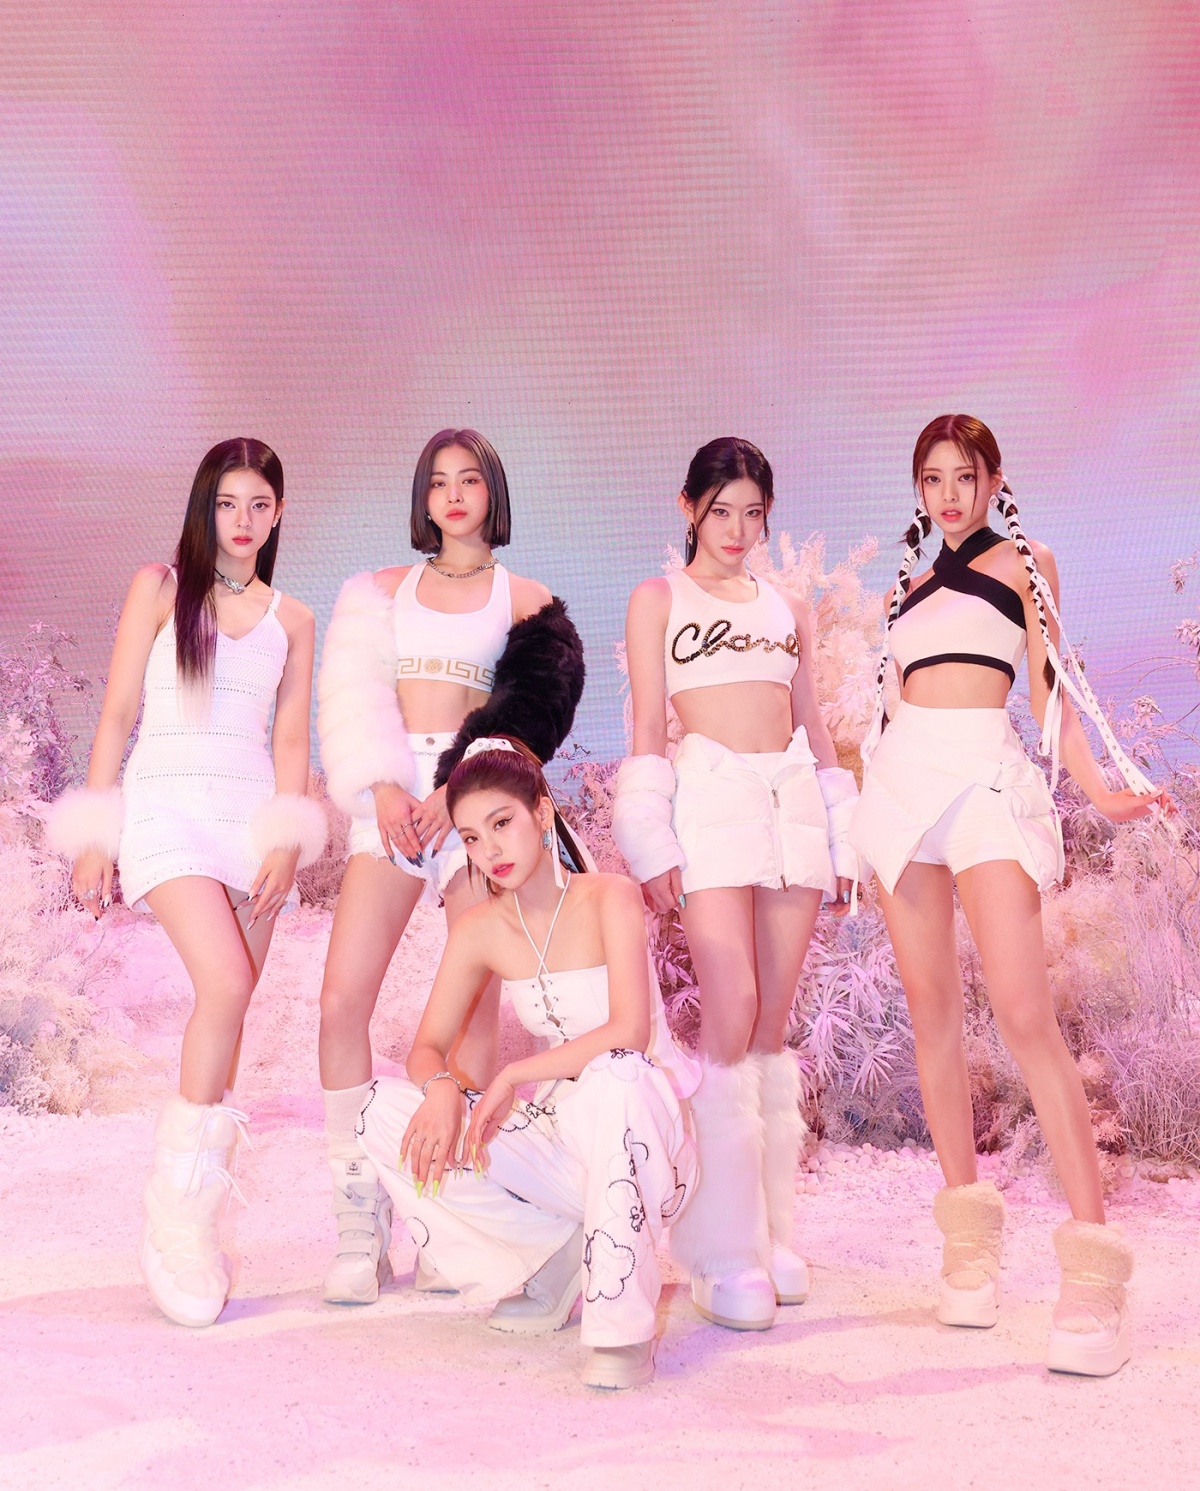 ITZY Breaks Own FirstSales Record With 'CHESHIRE' KpopStarz